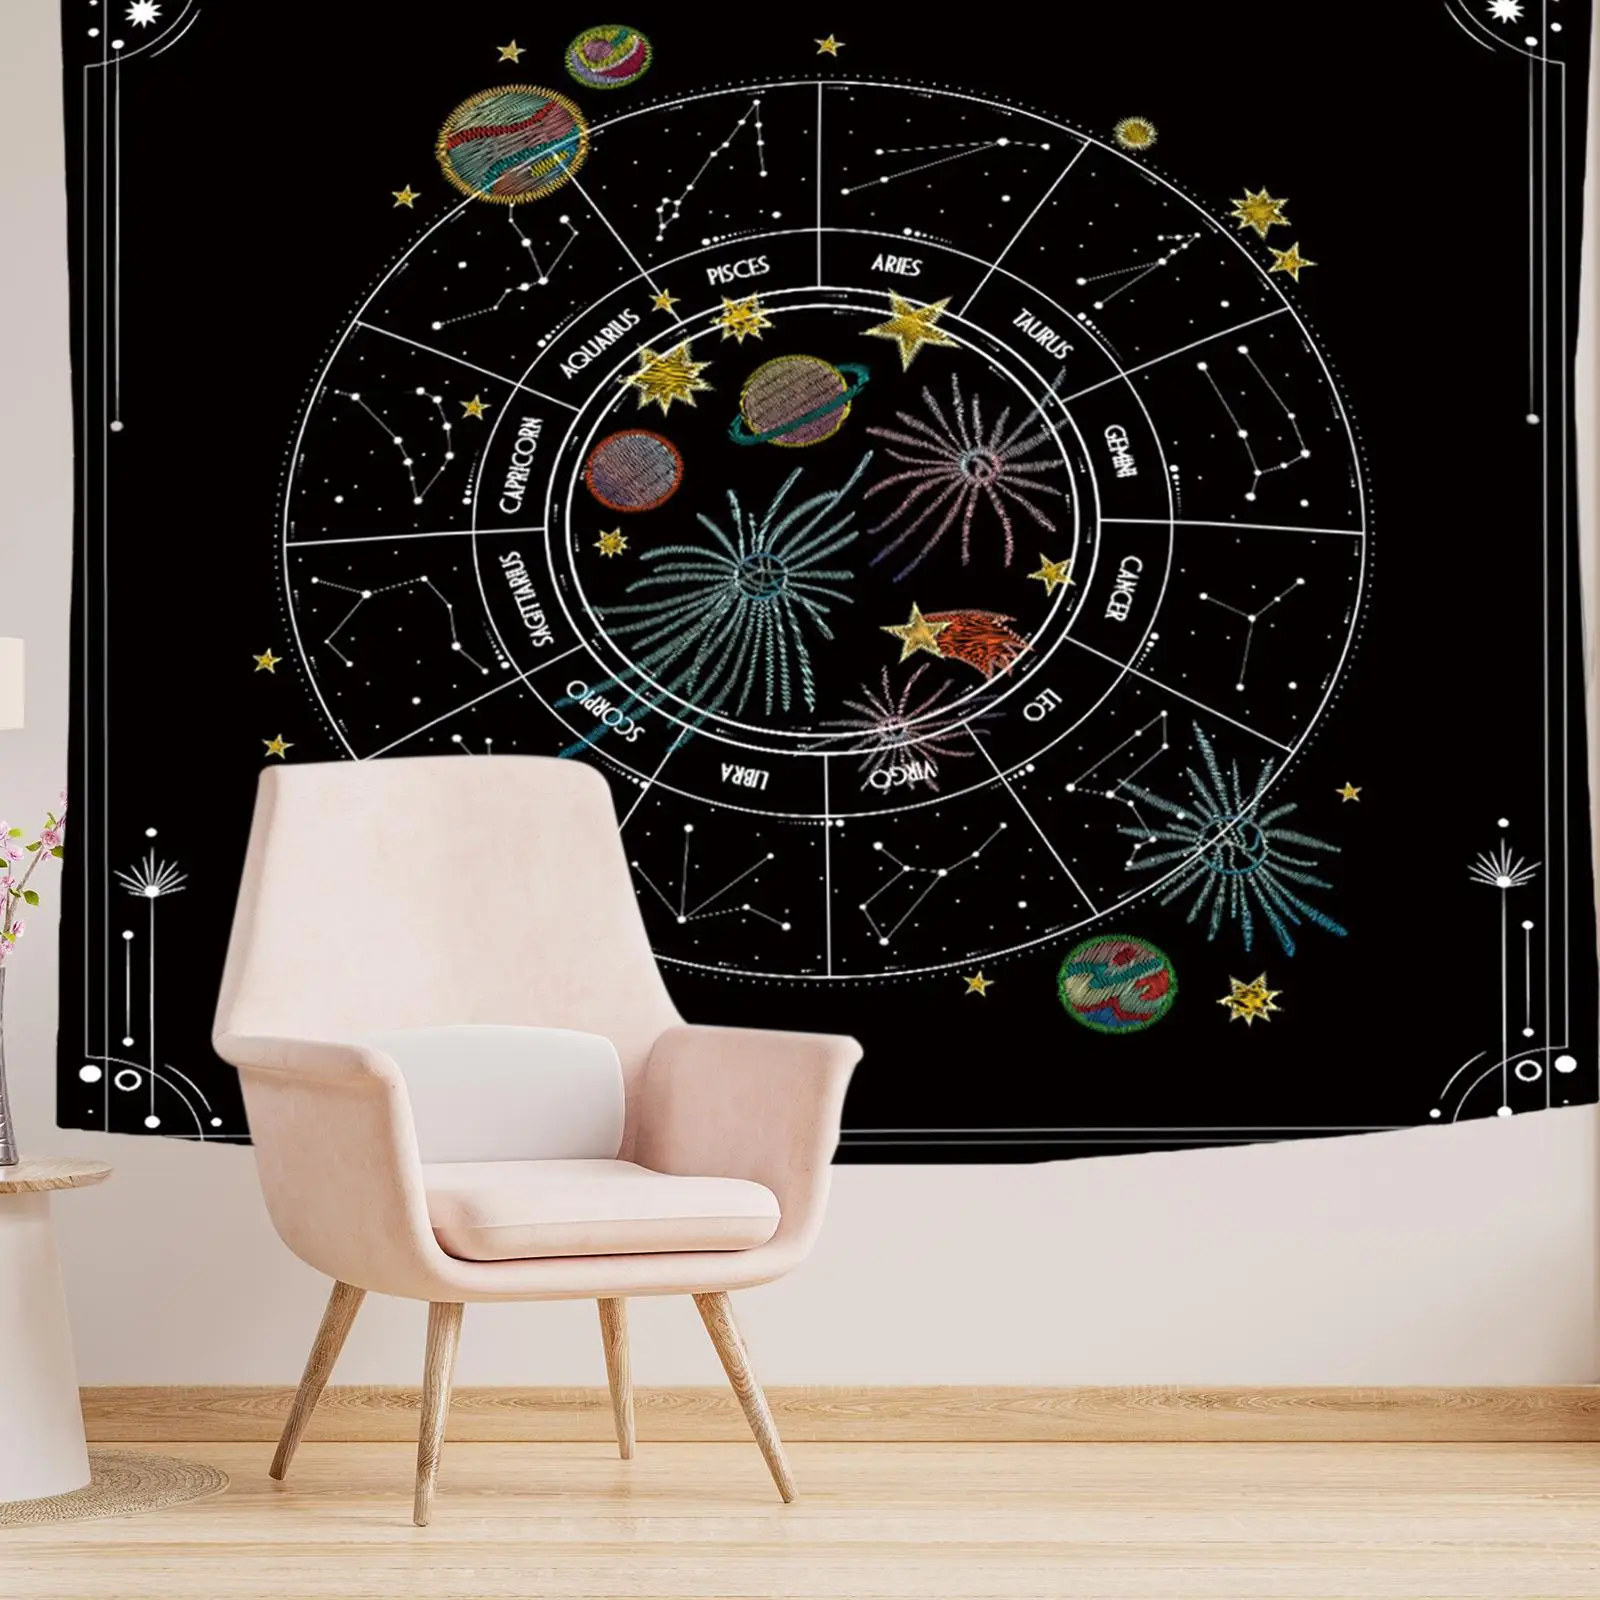 Aesthetic Bohemia Constellation Tapestry Wall Background Decoration Star Blanket for Home Decoration Hotel Bookshelf Ceiling